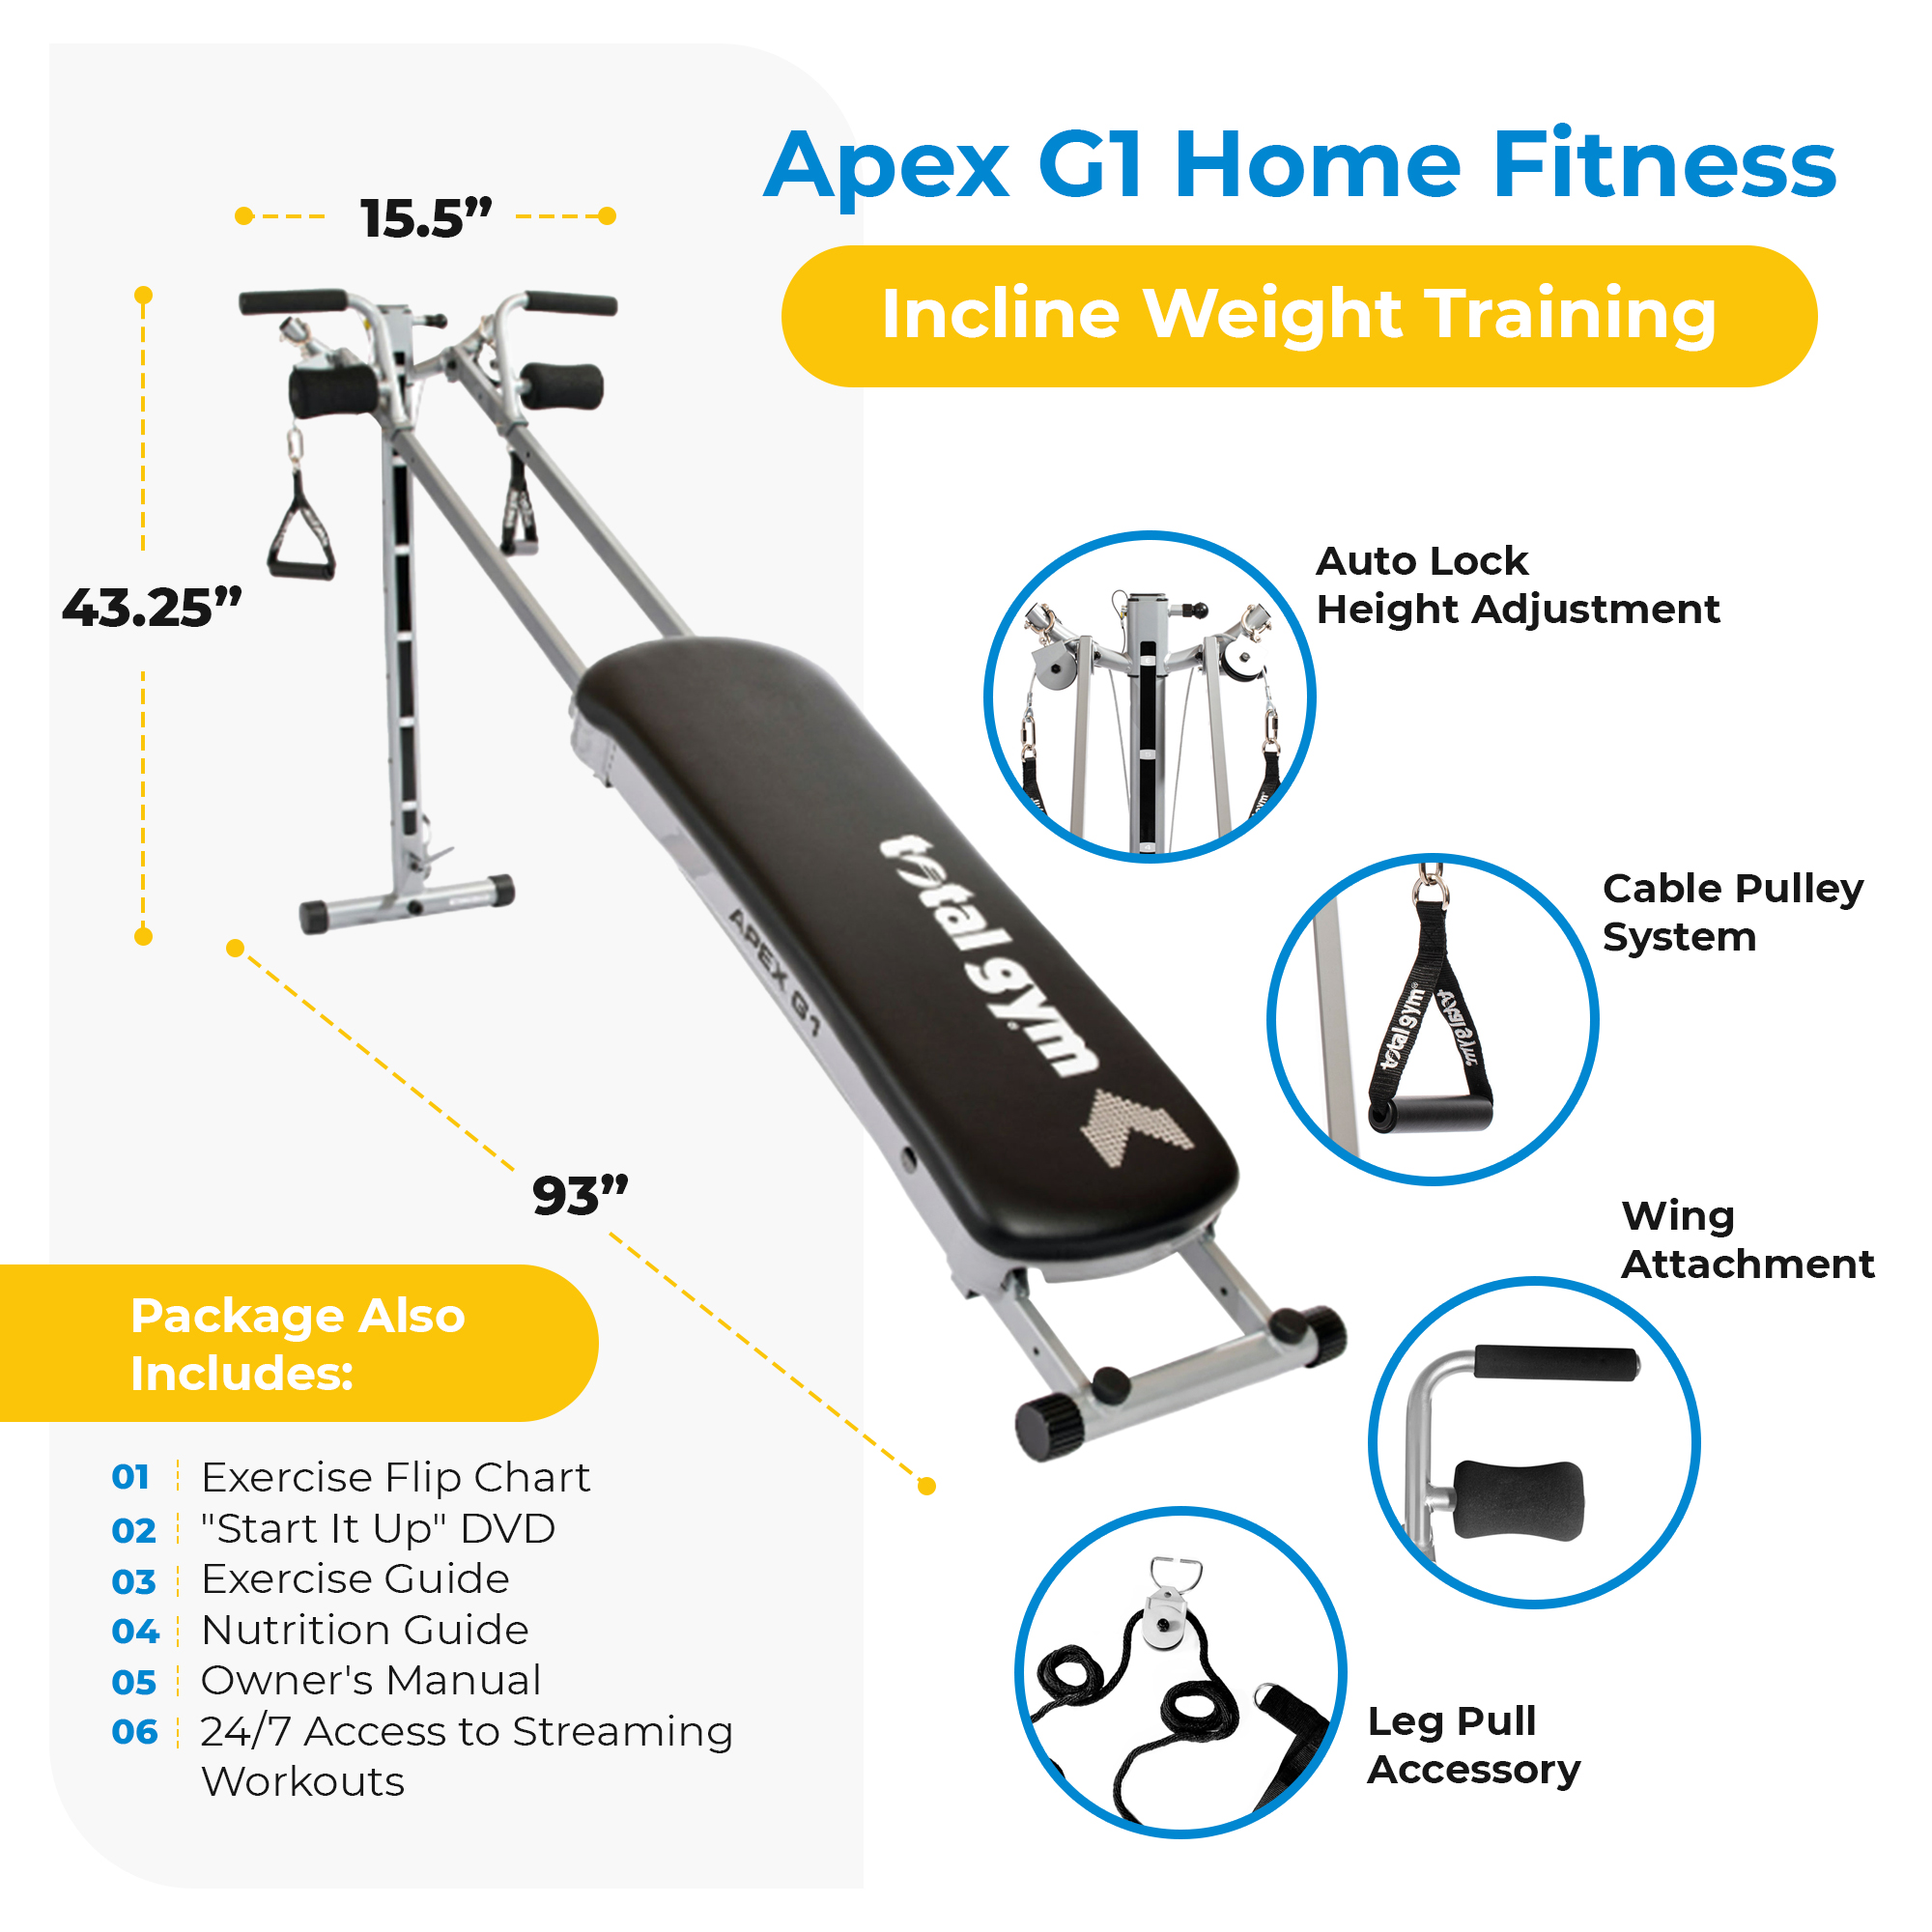 Total Gym APEX G1 Home Fitness Incline Weight Training w/Resistance Levels - image 3 of 12